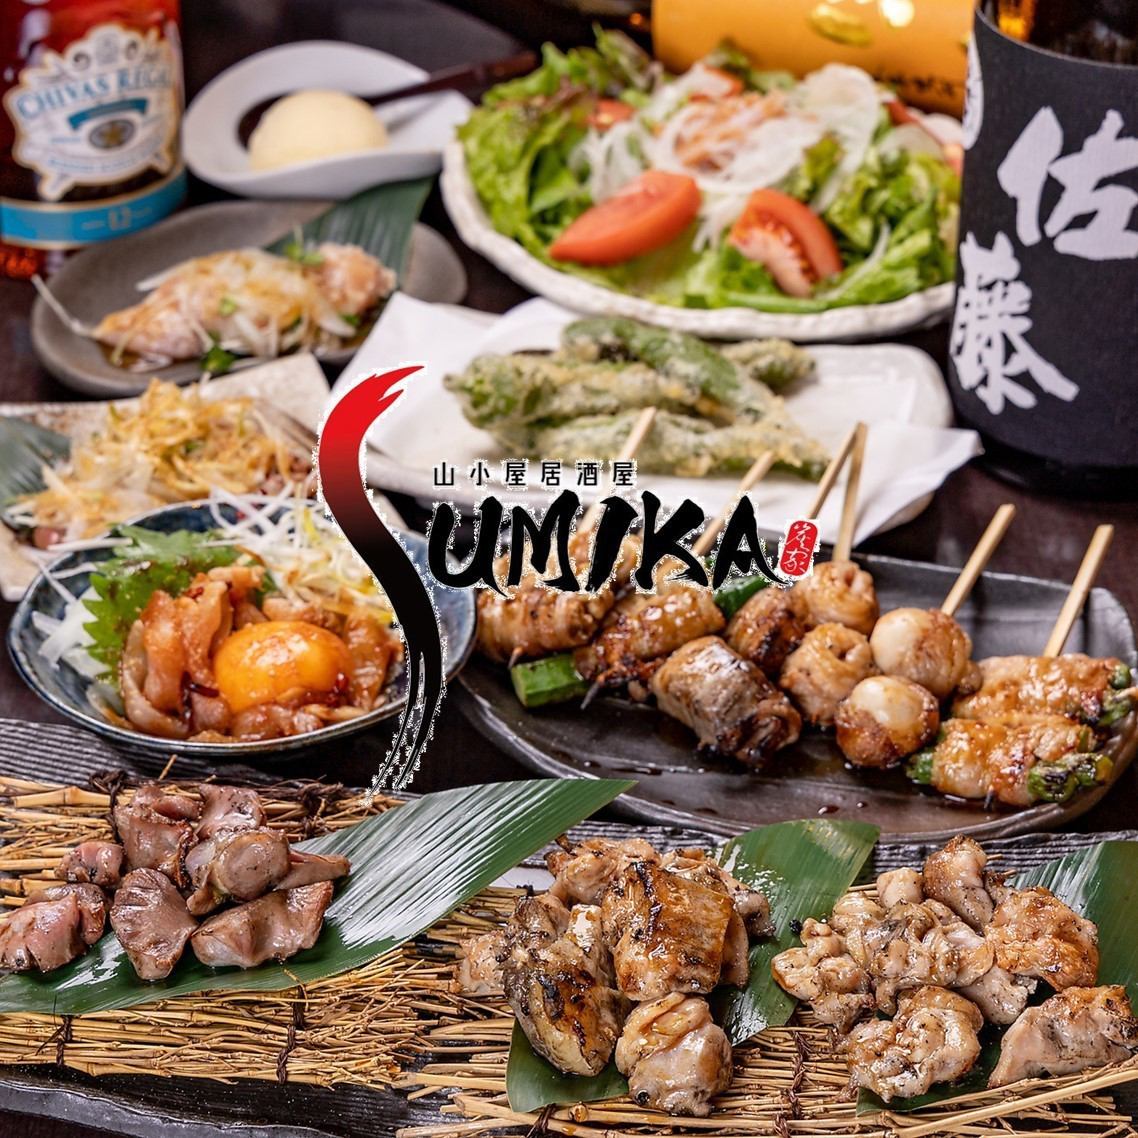 A restaurant specializing in charcoal-grilled yakitori and wild game dishes★Open every day with completely private rooms!